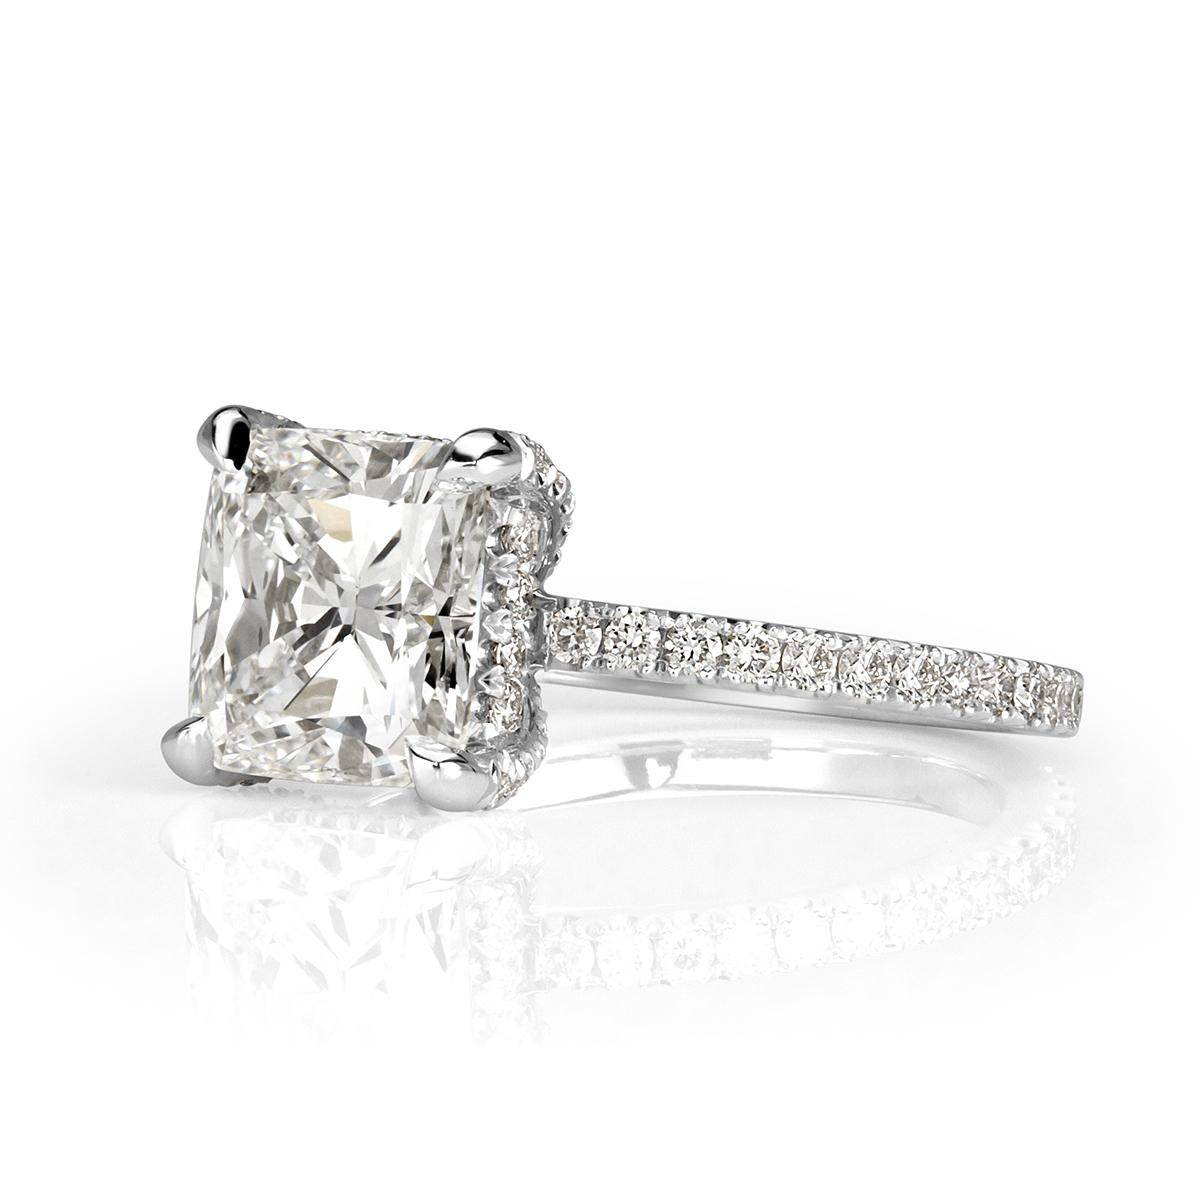 This stunning piece features a one of a kind 2.24ct cushion cut center diamond, GIA certified at H-VVS1. It has amazing measurements of 7.80 x 7.40mm and faces up a crisp white in addition of being graded at excellent in polish and symmetry. It is